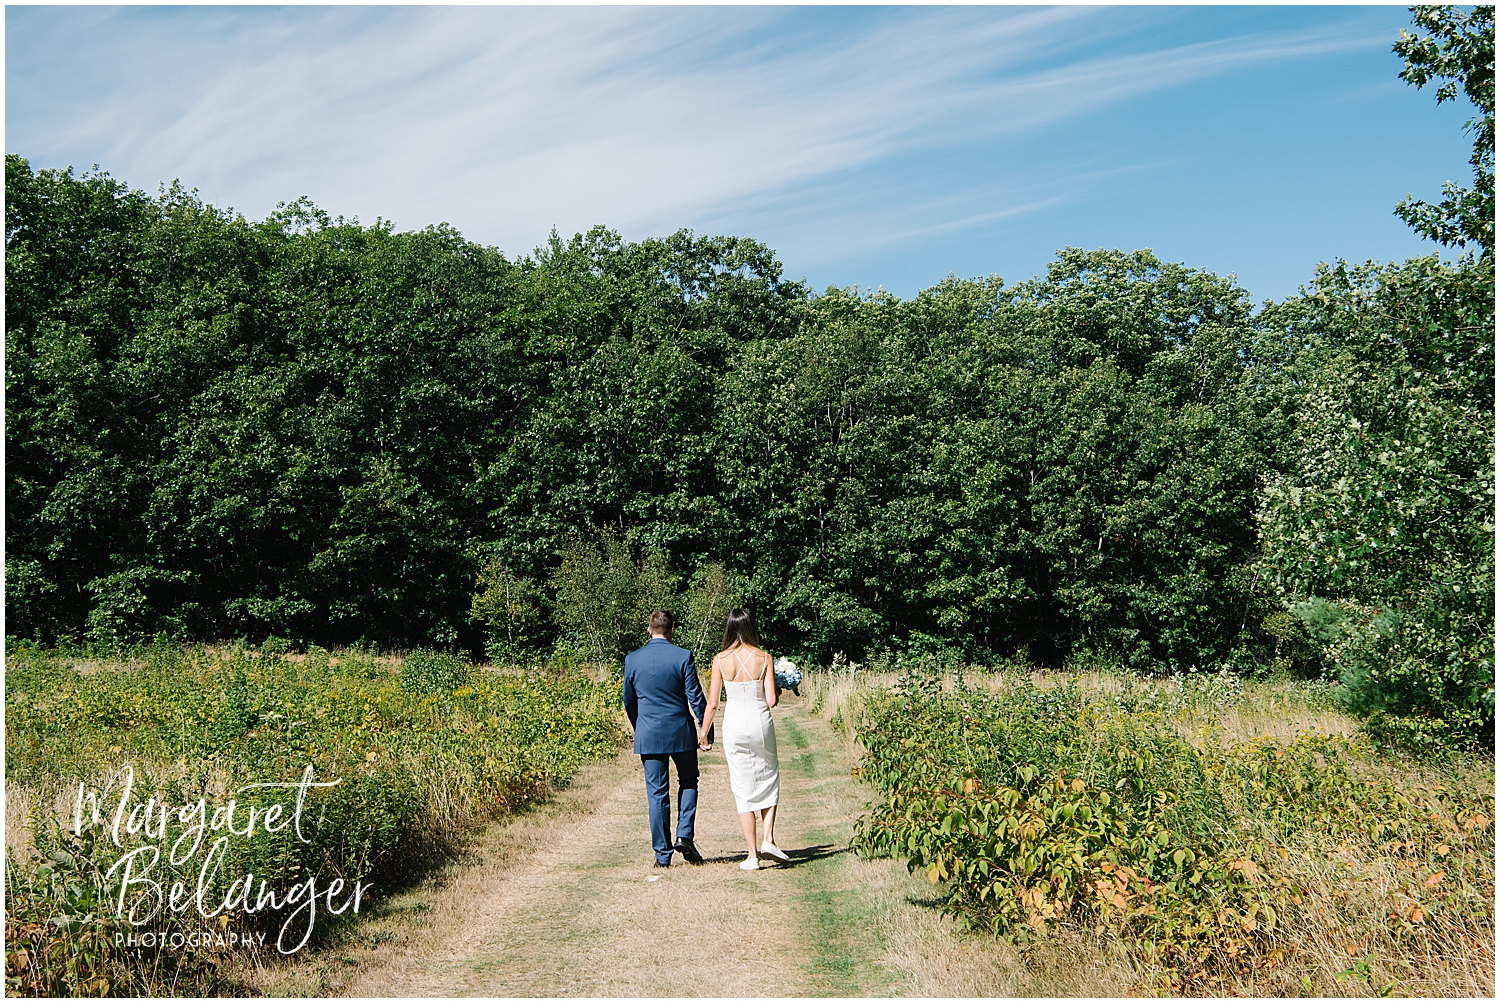 A bride and groom holding hands and walking down a natural path flanked by lush greenery under a clear blue sky.